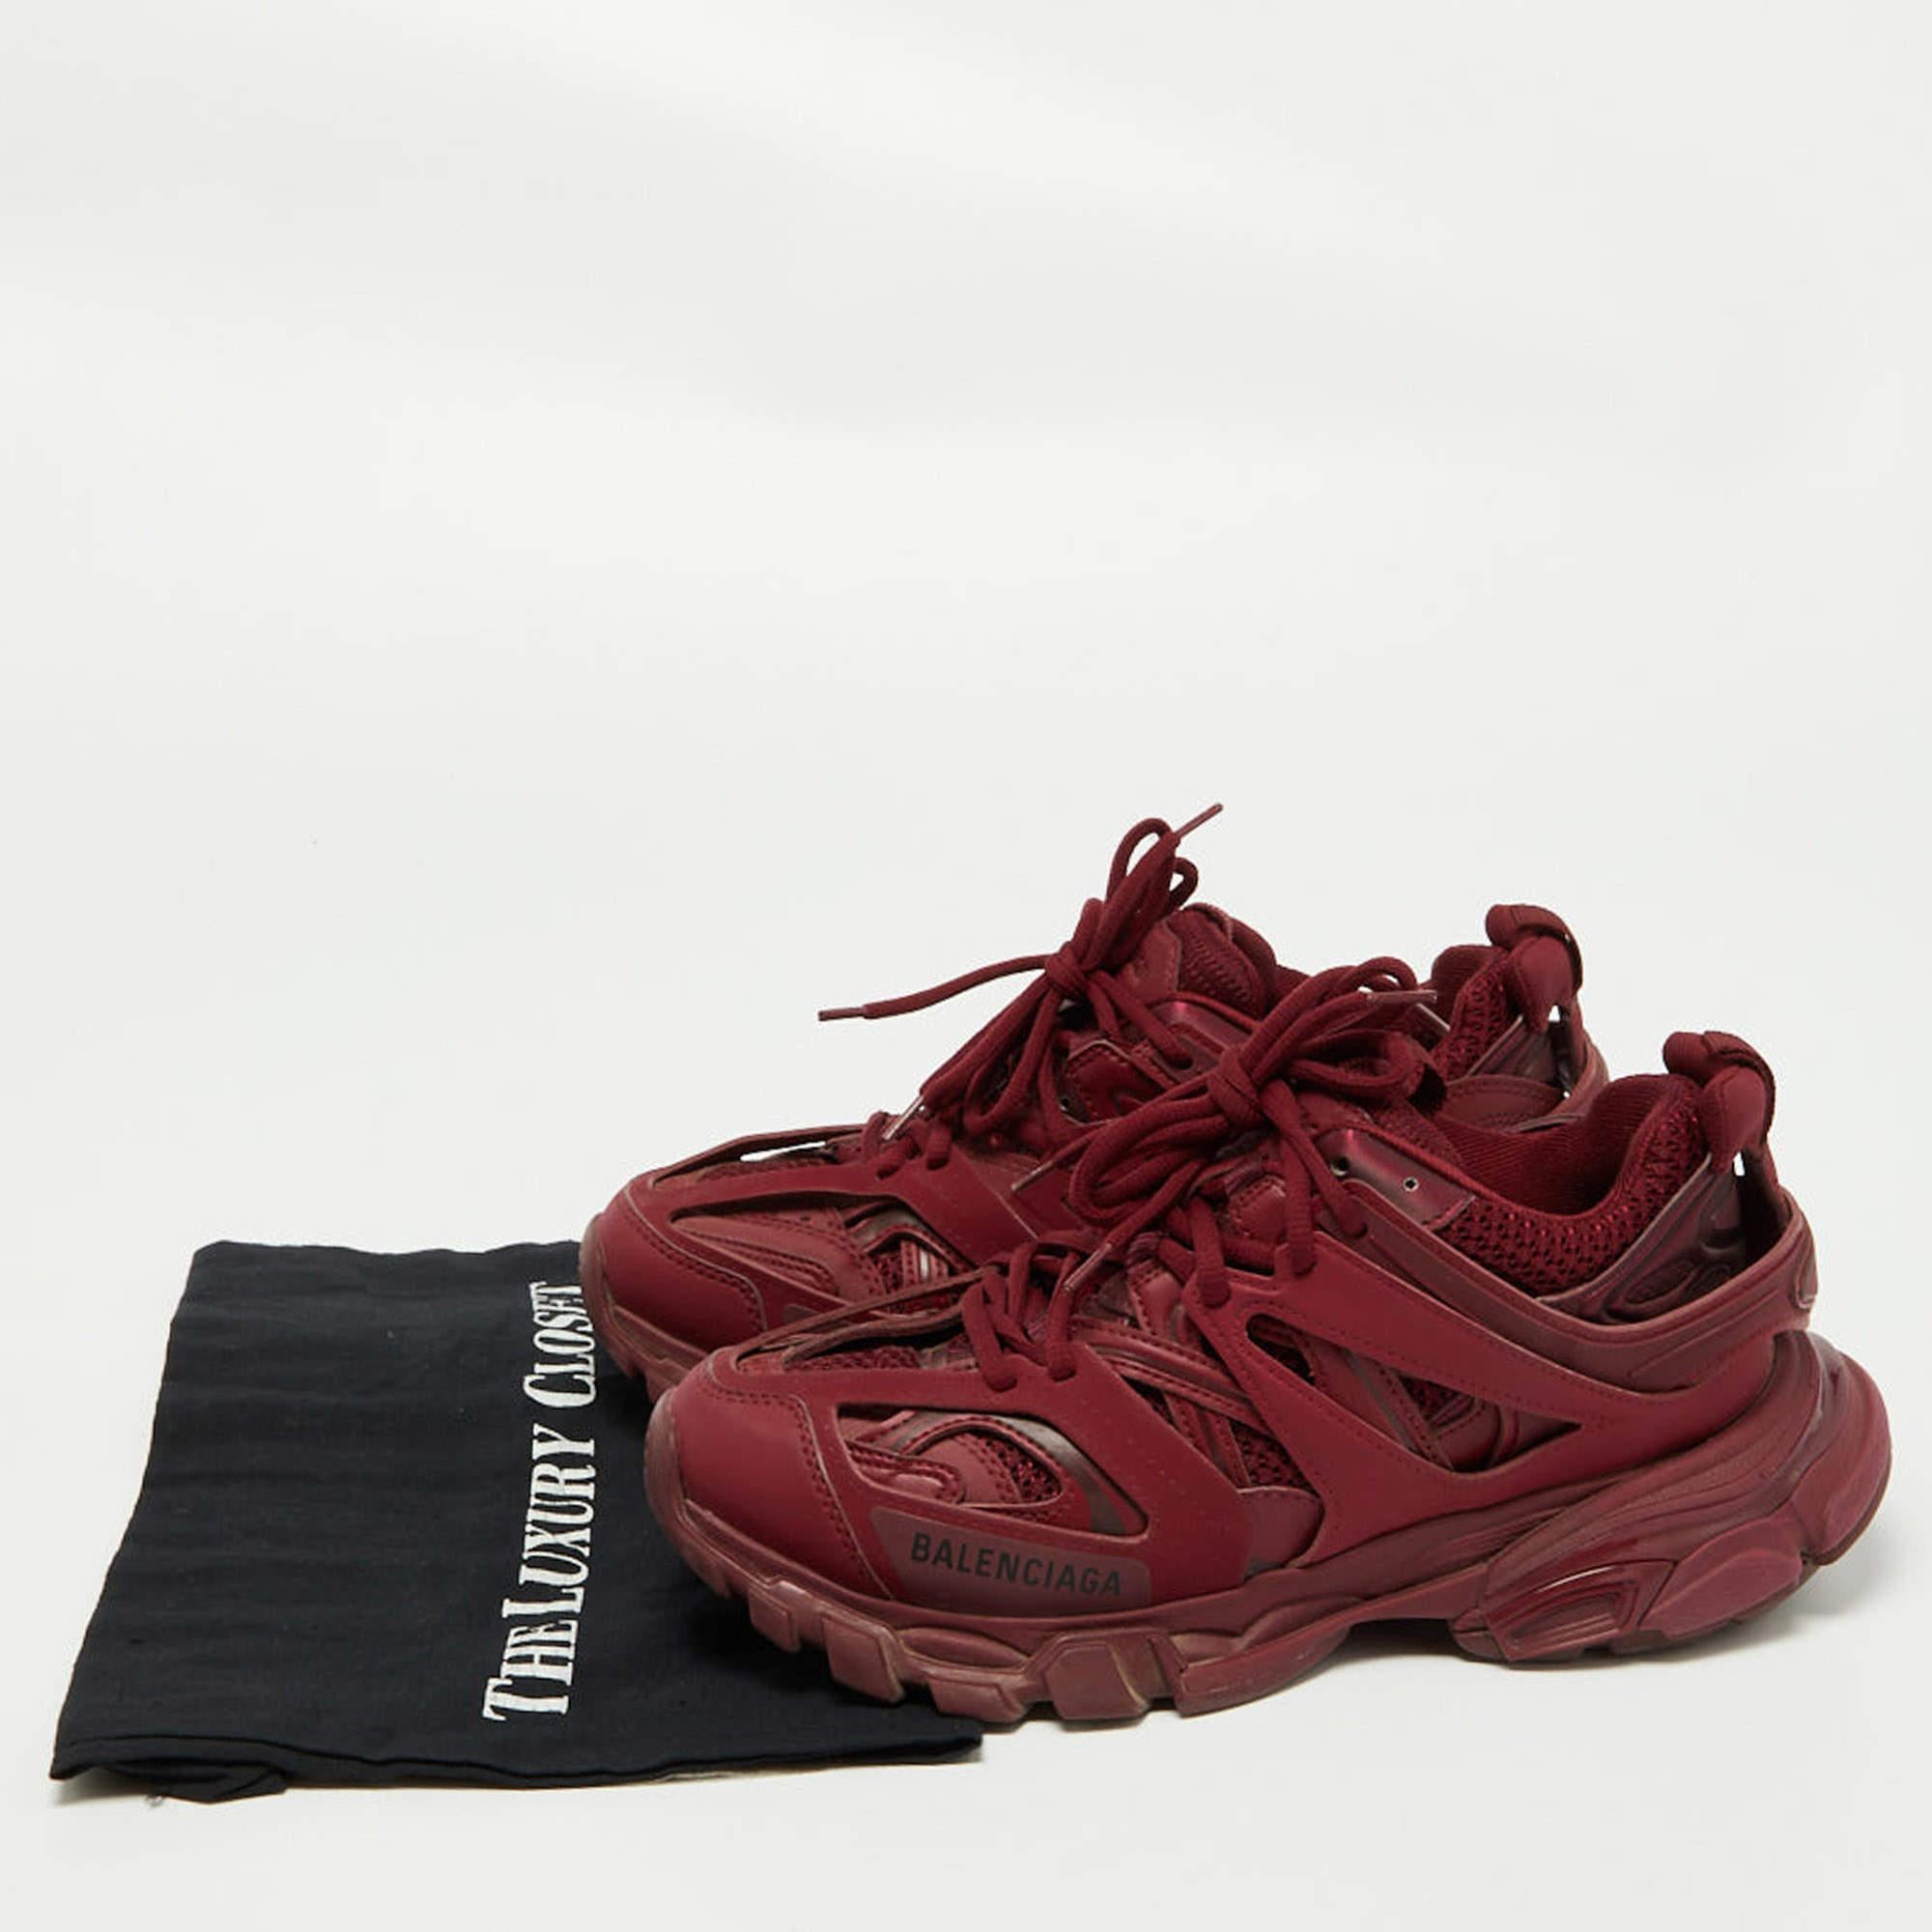 Balenciaga Burgundy Mesh and Leather Track Sneakers Size 38 3